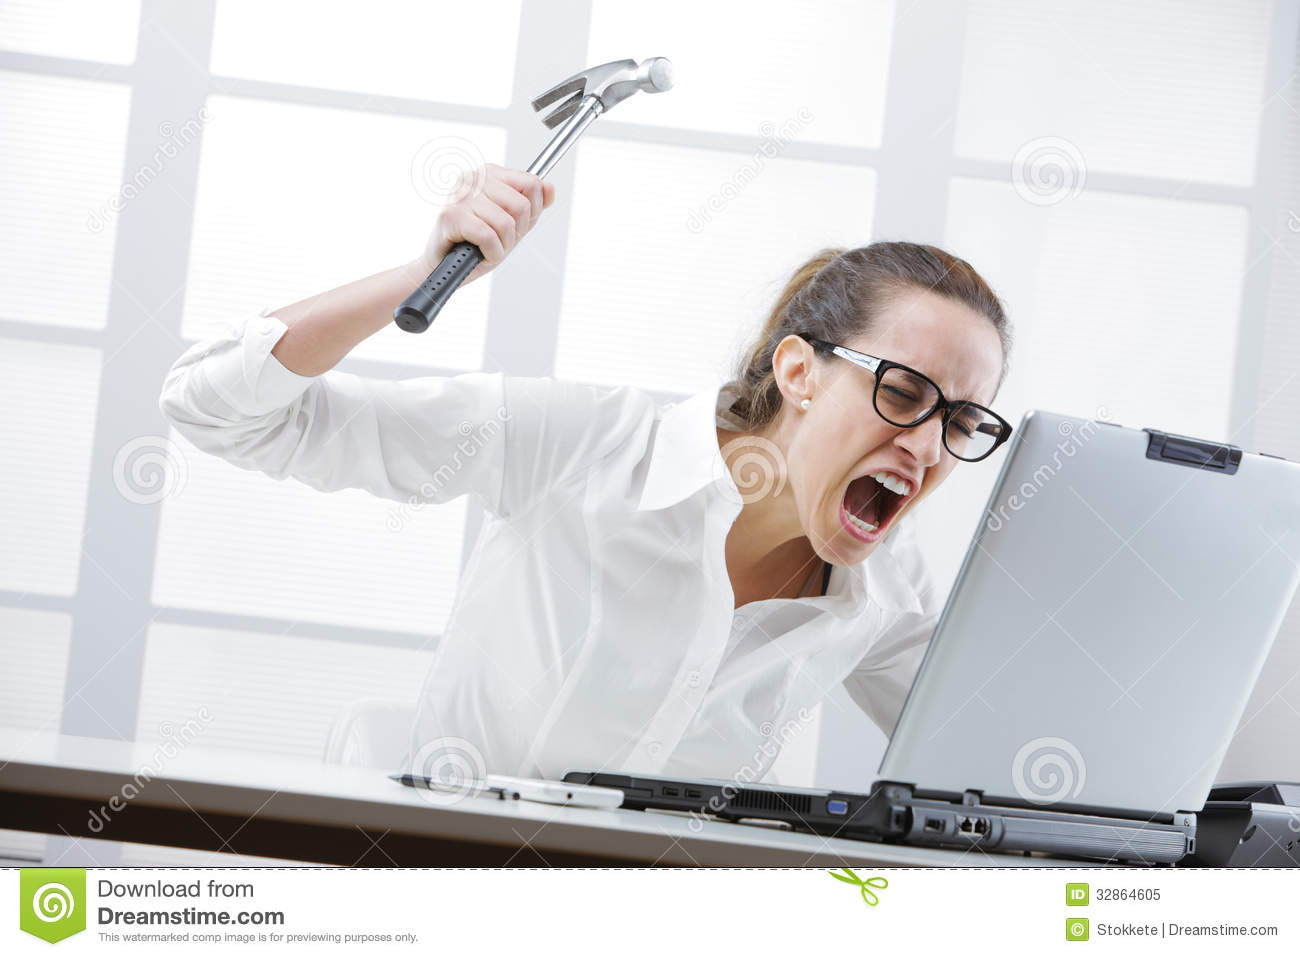 Computer Problems Royalty Free Stock Photo   Image  32864605